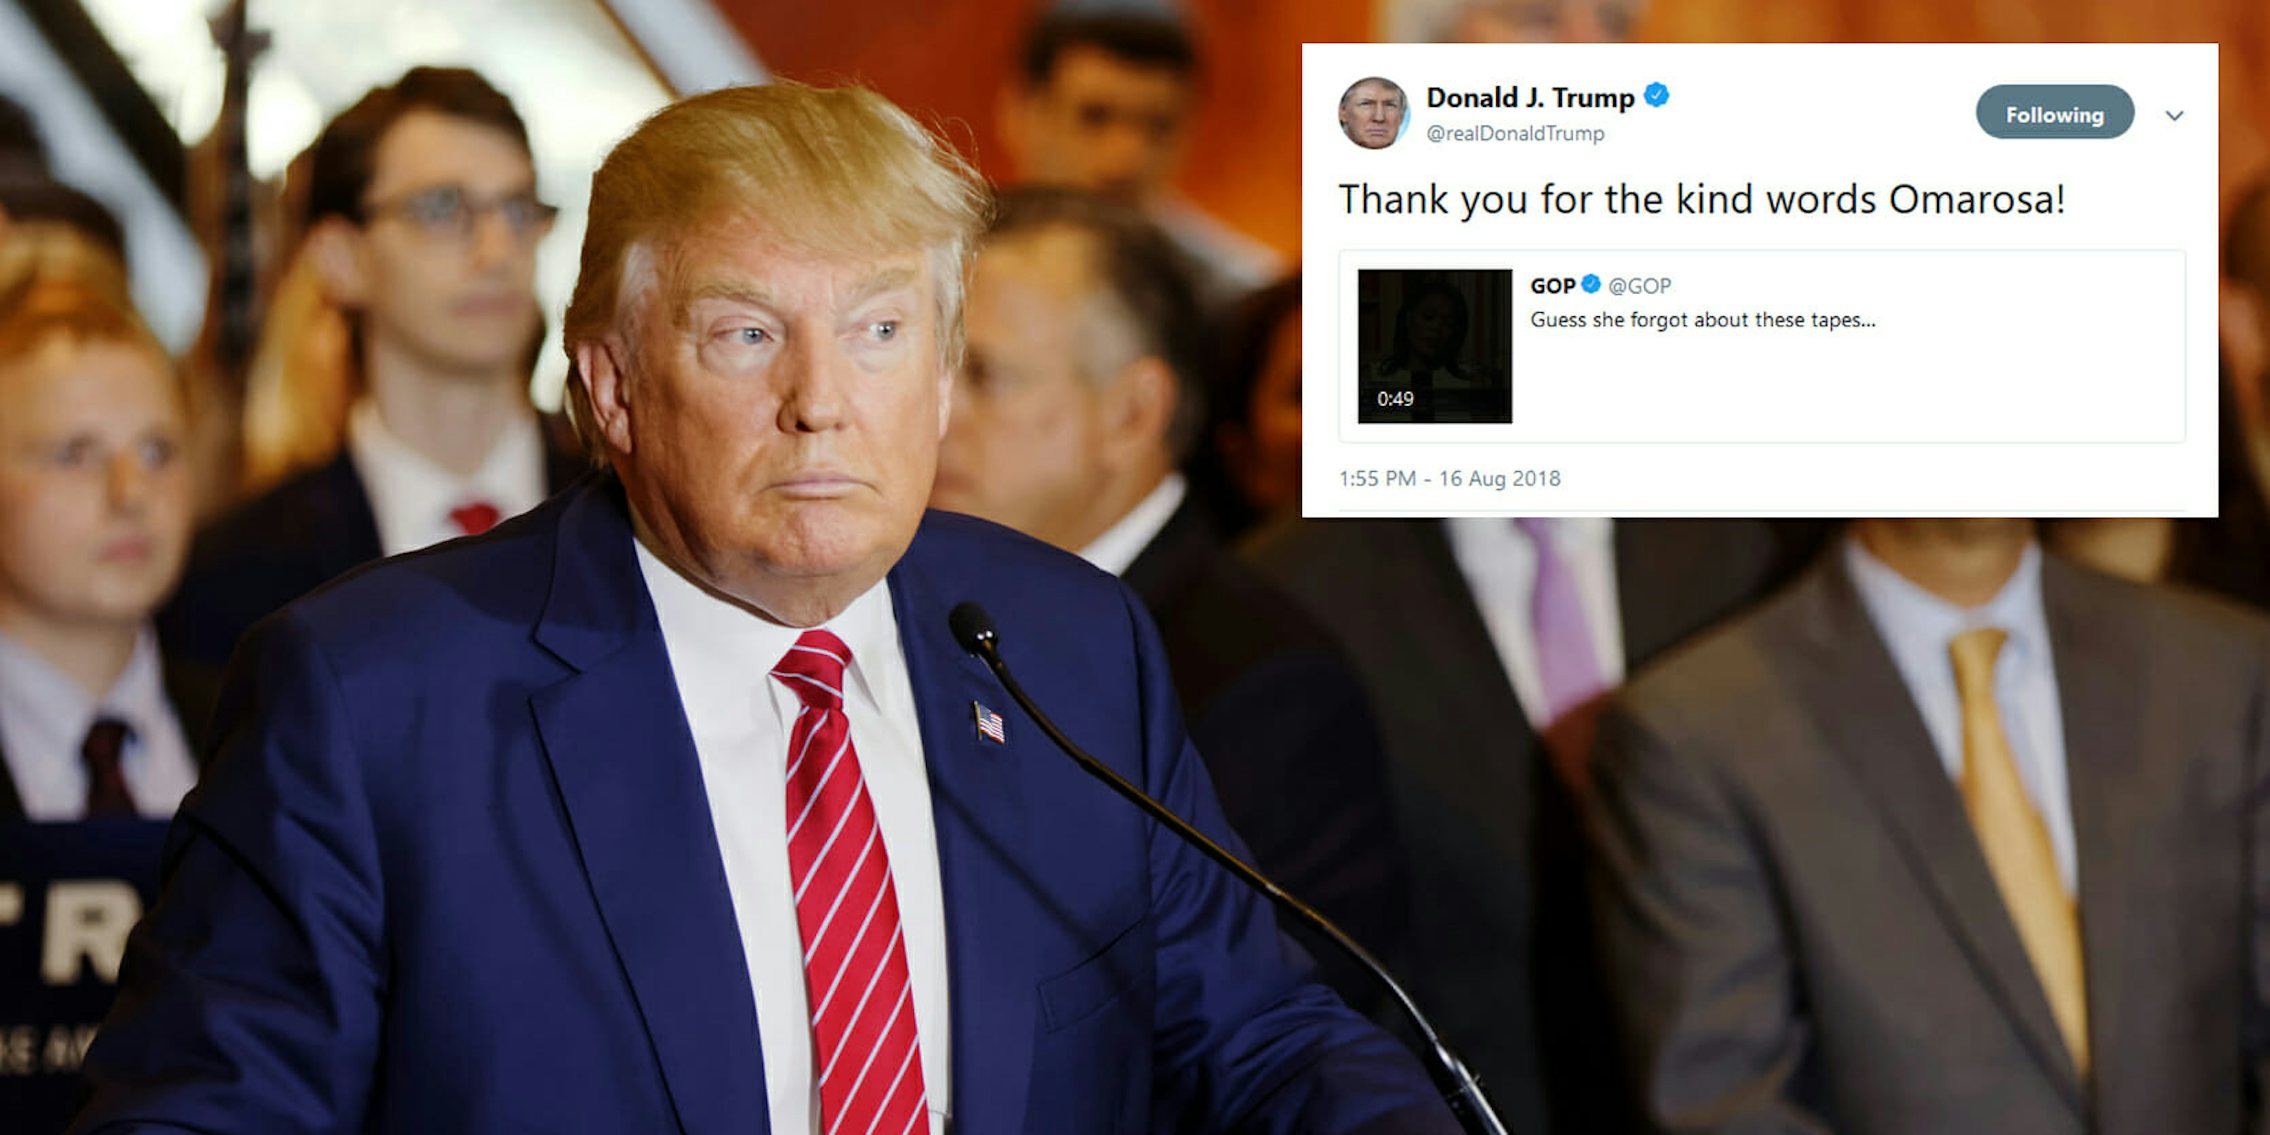 President Donald Trump continued his offensive against former administration official Omarosa Manigault Newman on Thursday by retweeting a GOP-made video that shows her showering the president with praise.